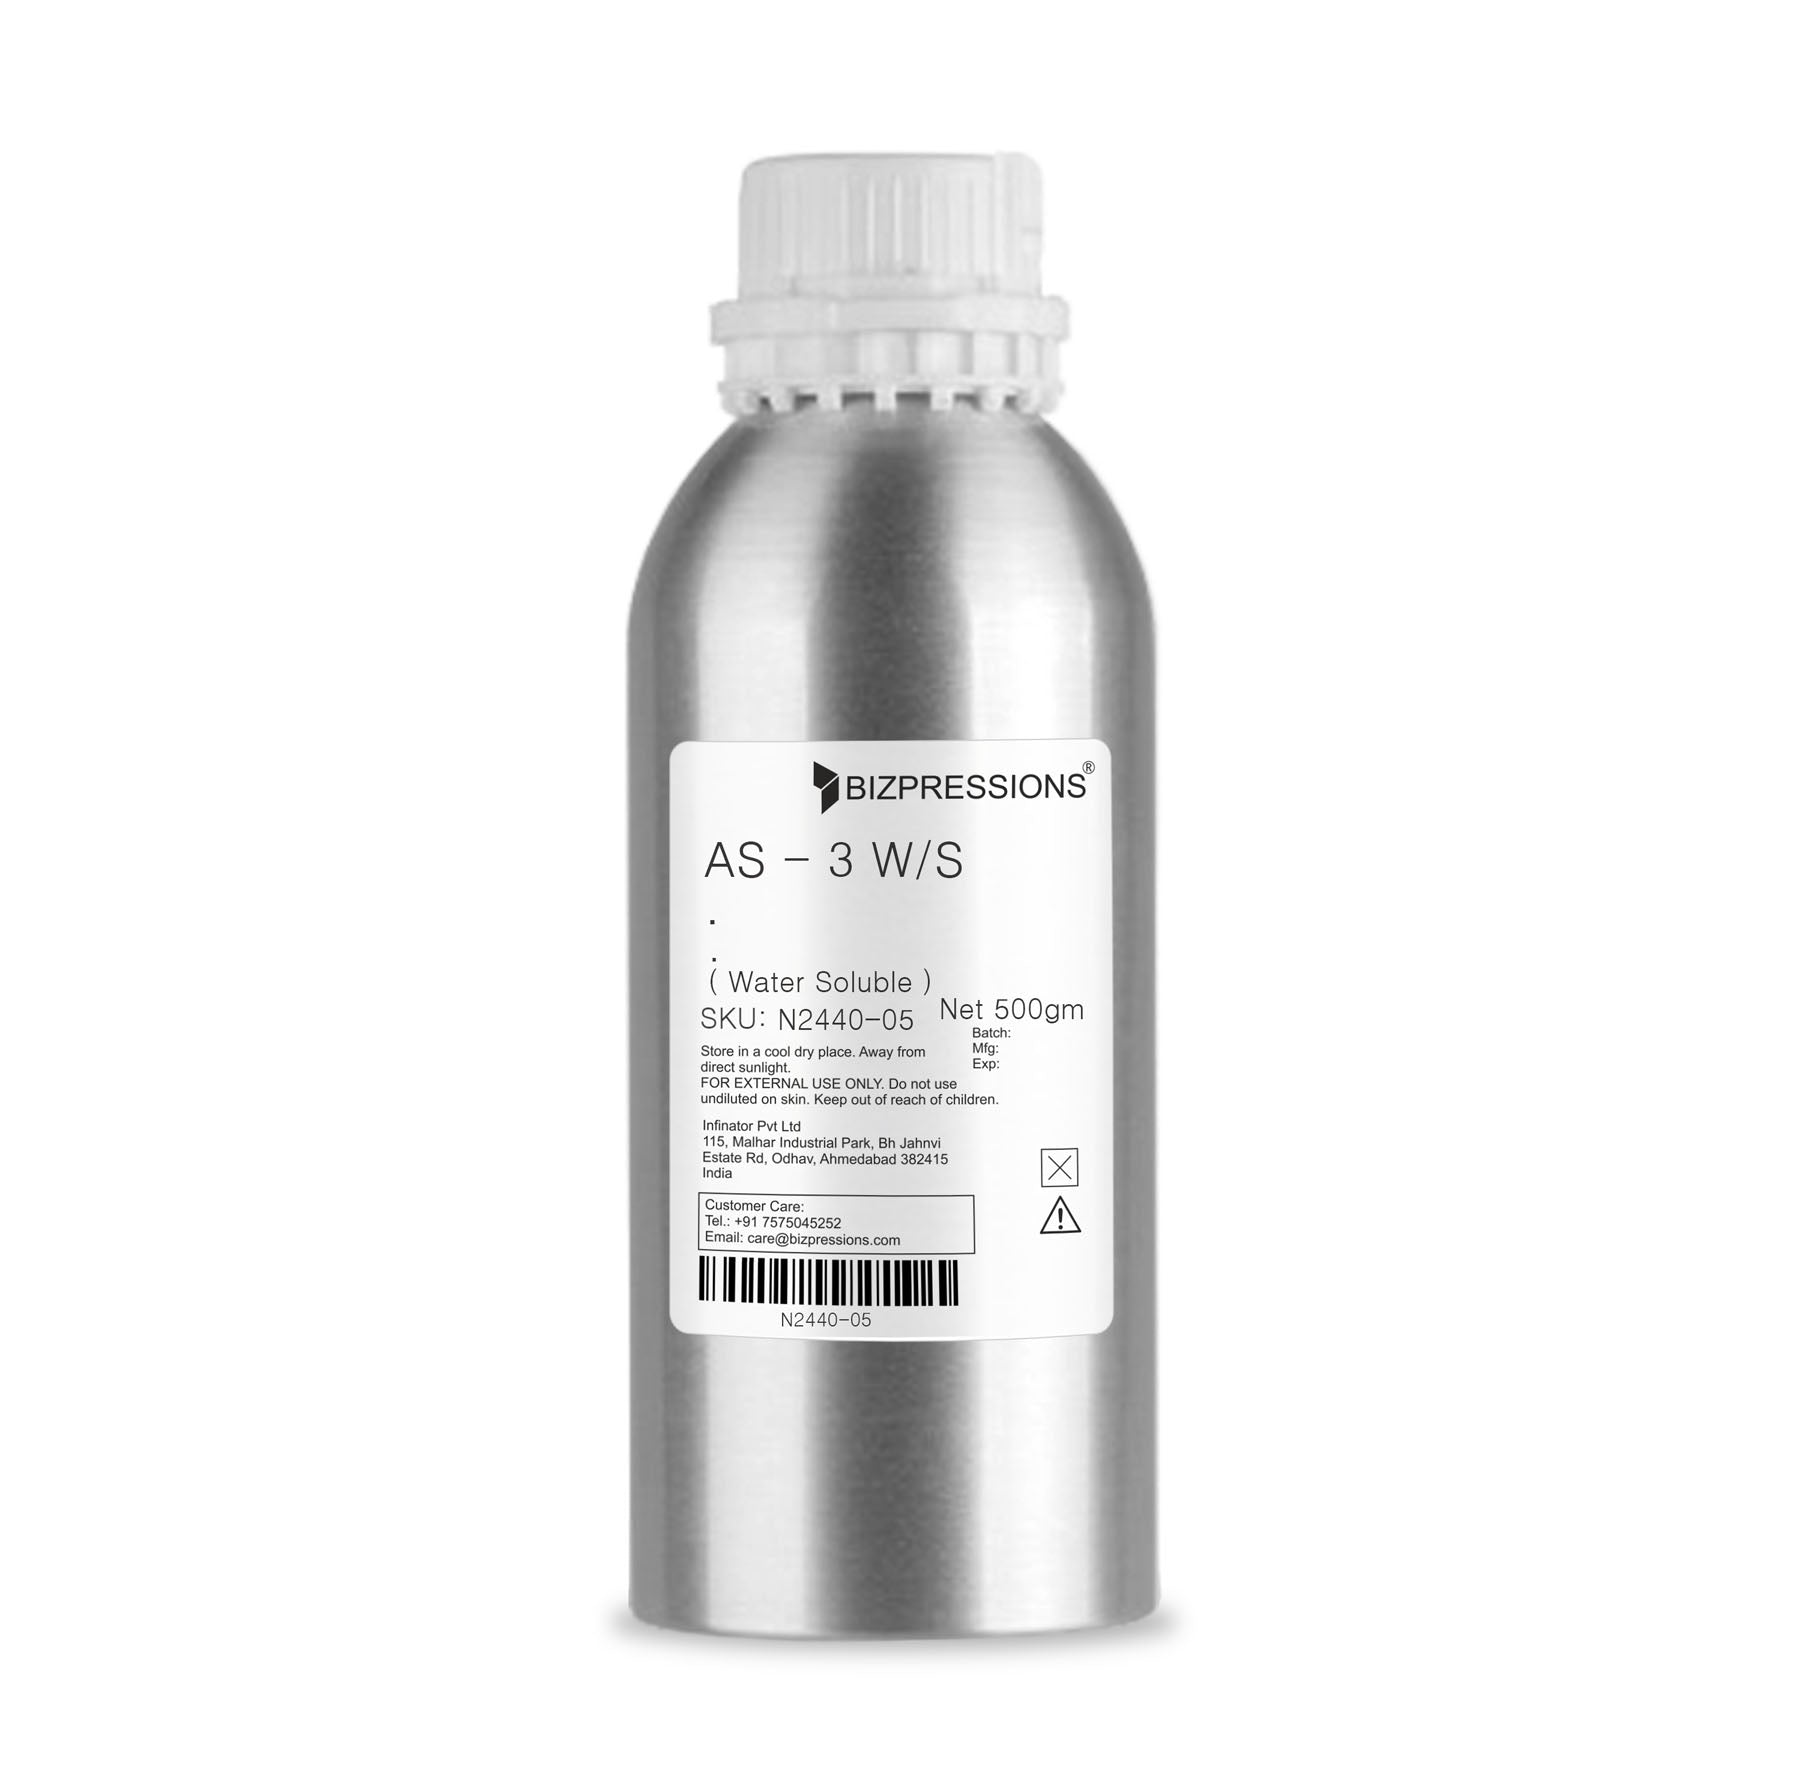 AS - 3 W/S - Fragrance ( Water Soluble ) - 500 gm